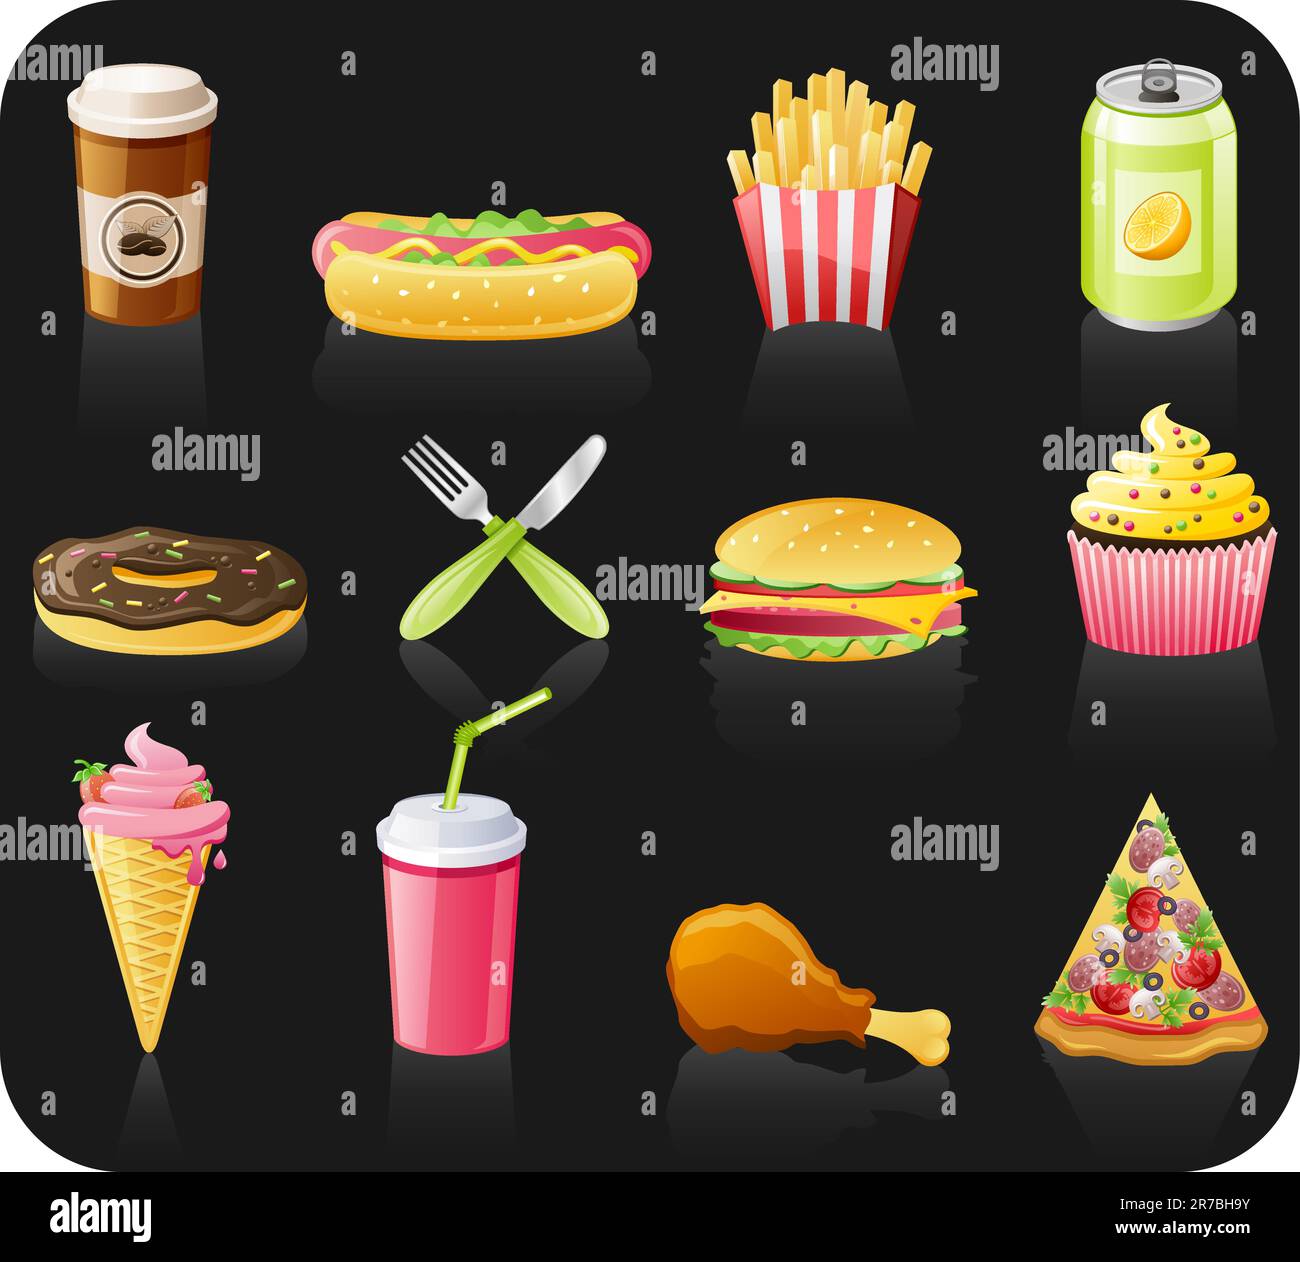 Fast food black background  icon set: coffee, hot dog, french fries, doughnut, fork, burger, fruitcake, ice-cream, drink, chicken, pizza Stock Vector